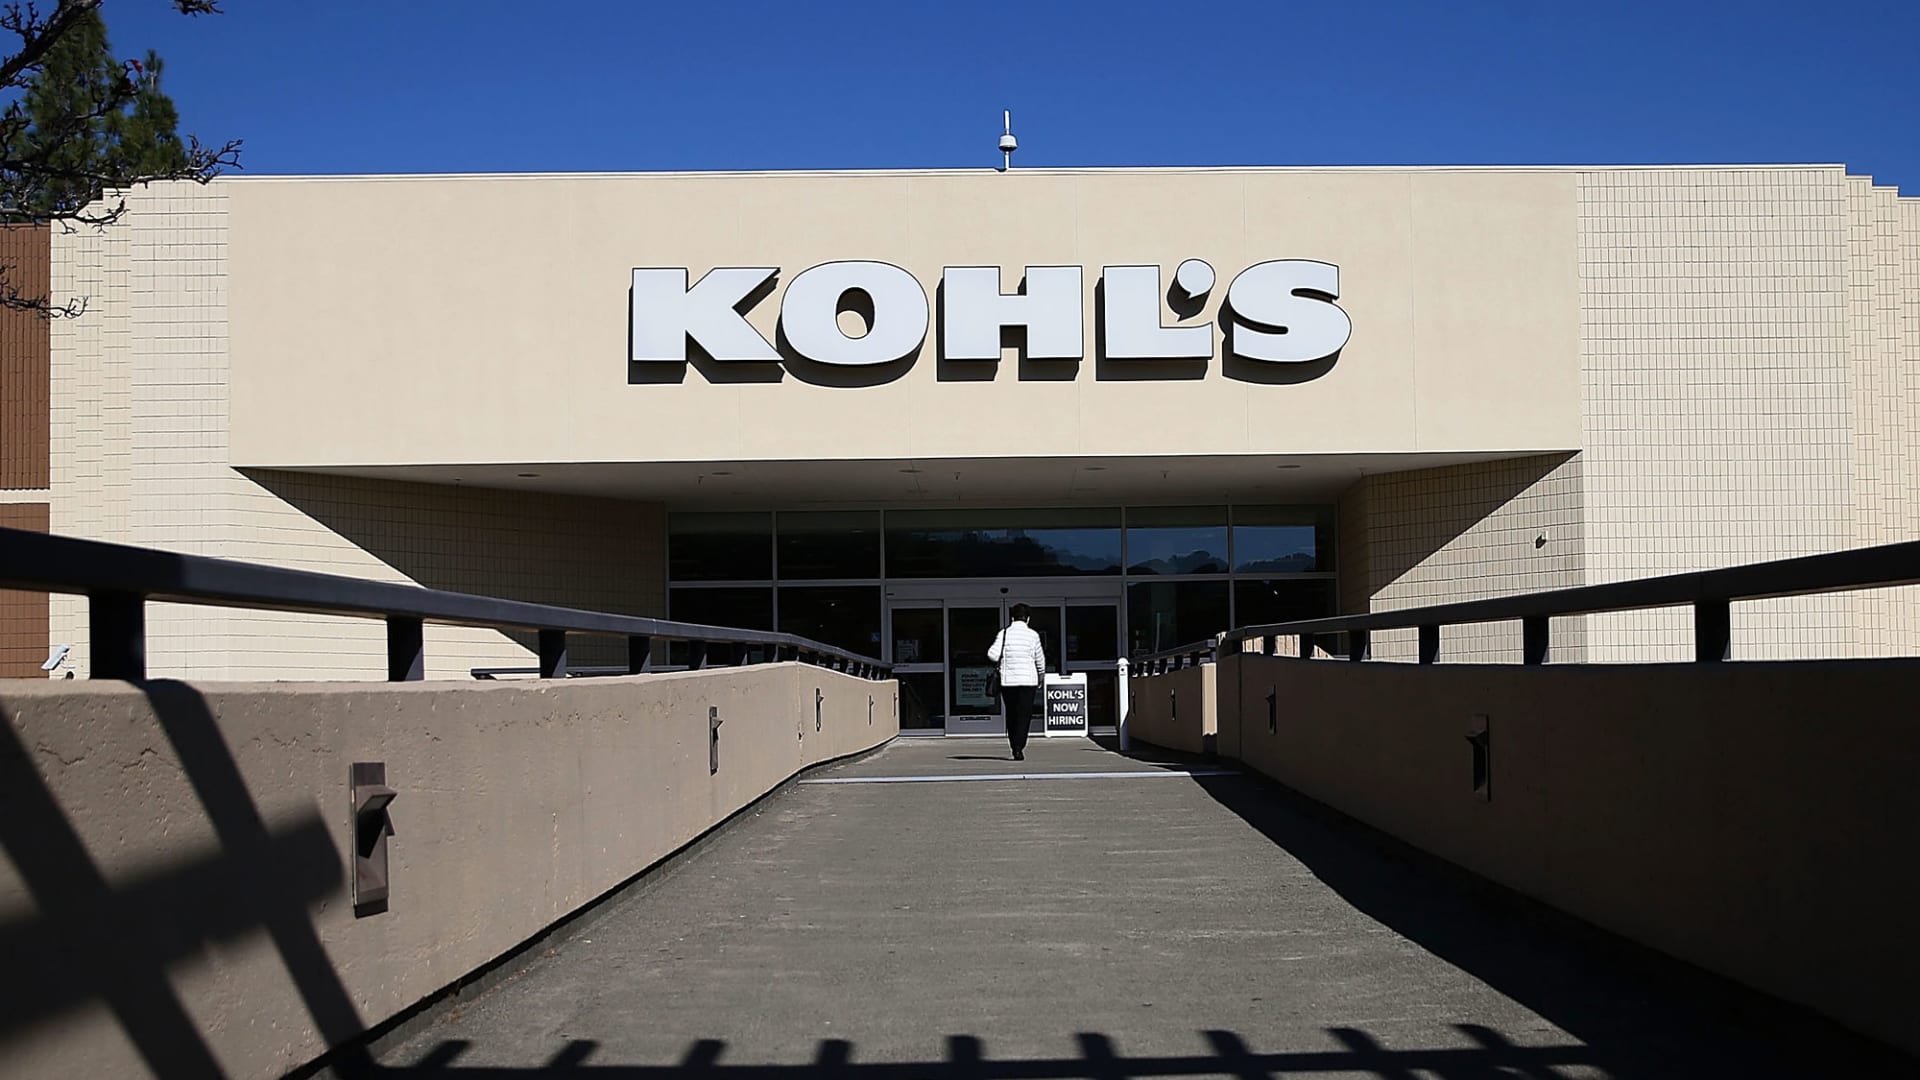 Kohl’s terminates sale talks with Vitamin Shoppe owner Franchise Group: Sources